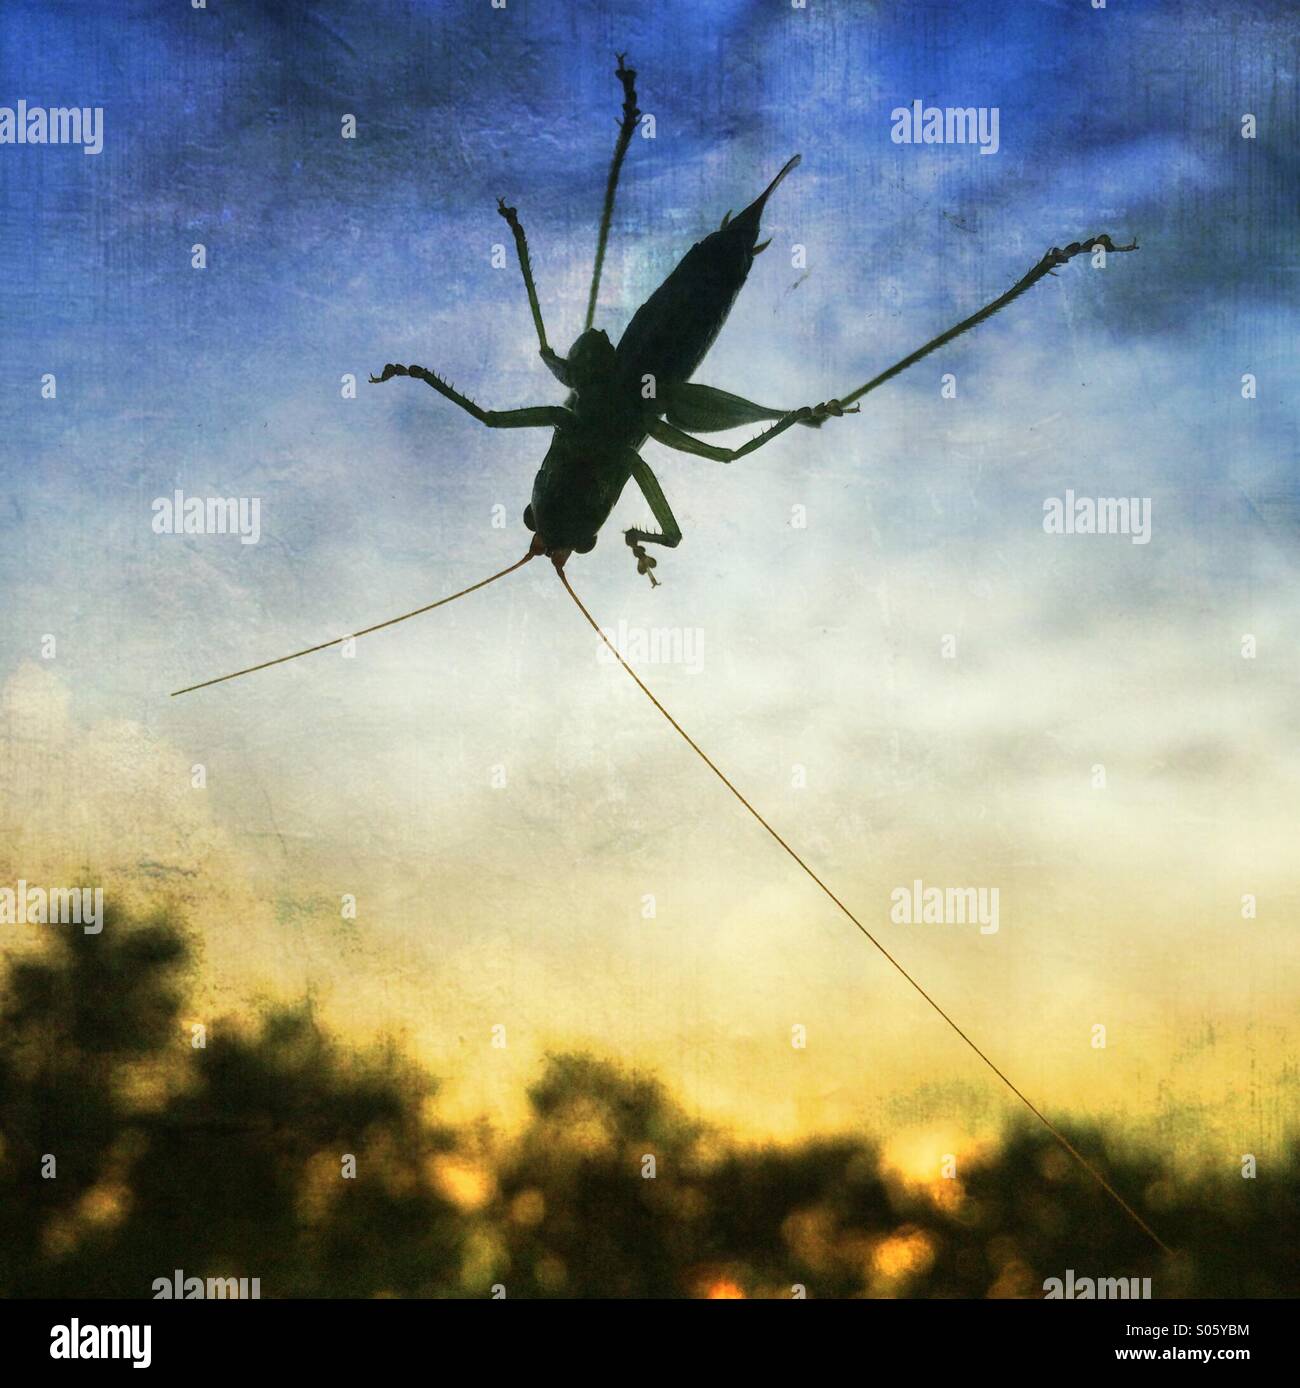 Silhouette of a grasshopper against an evening sky Stock Photo